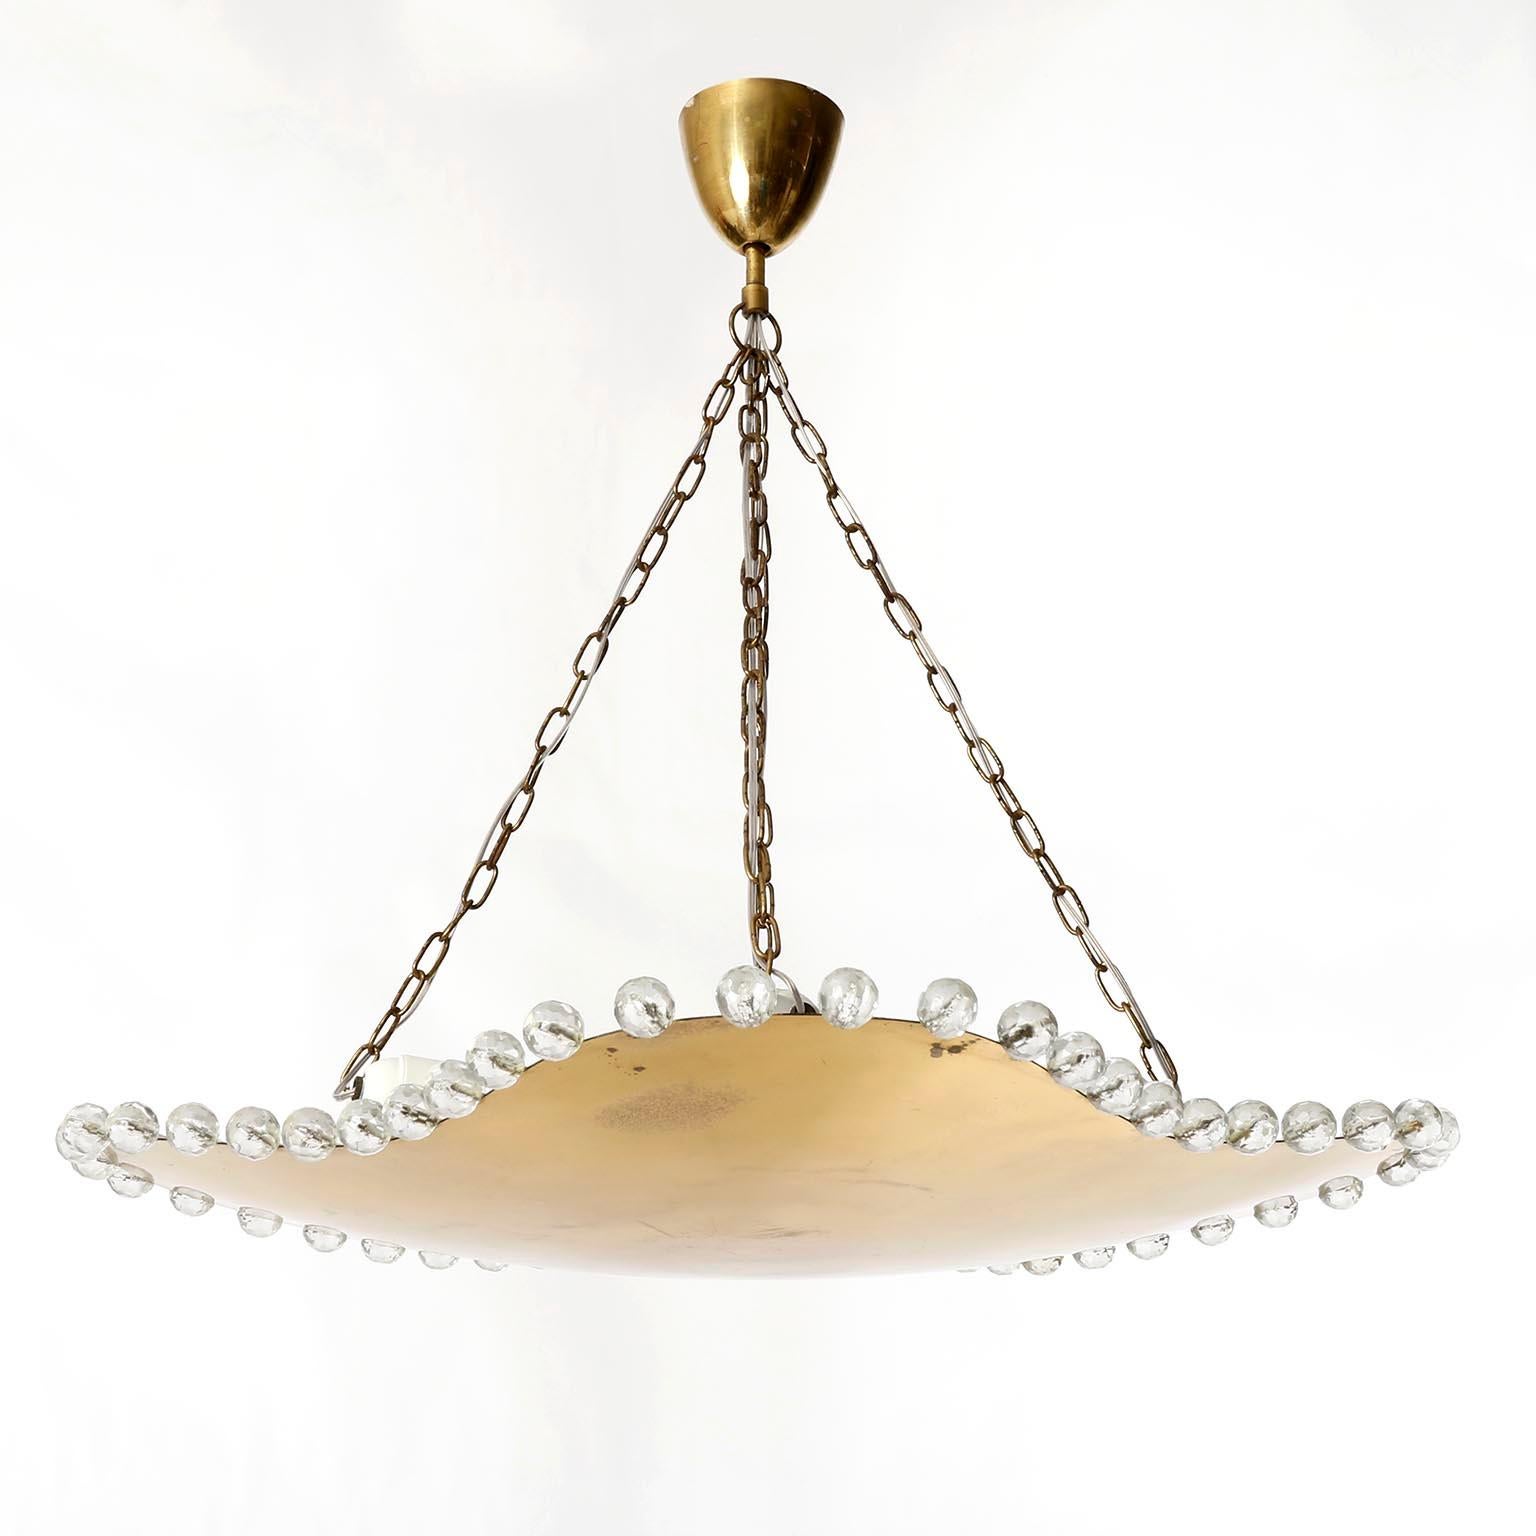 A gorgeous uplight chandelier by Rupert Nikoll, Vienna, Austria, manufactured in Mid-Century, circa 1960 (1950s or early 1960s).
An organic shaped brass bowl made of solid polished brass which has an aged surface in a rich and warm tone and lovely